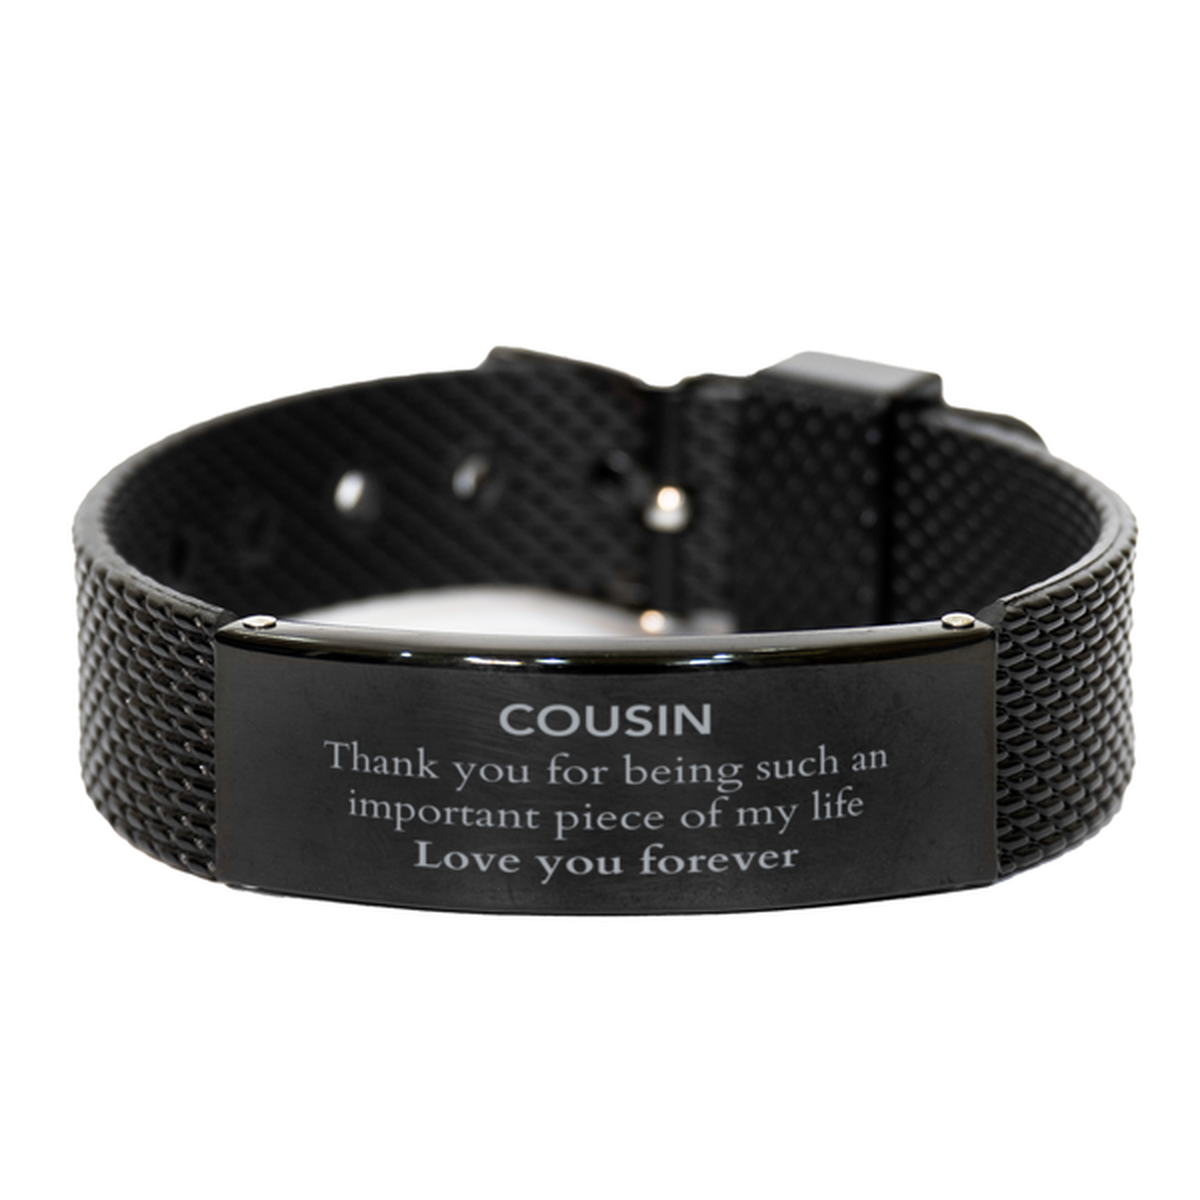 Appropriate Cousin Black Shark Mesh Bracelet Epic Birthday Gifts for Cousin Thank you for being such an important piece of my life Cousin Christmas Mothers Fathers Day